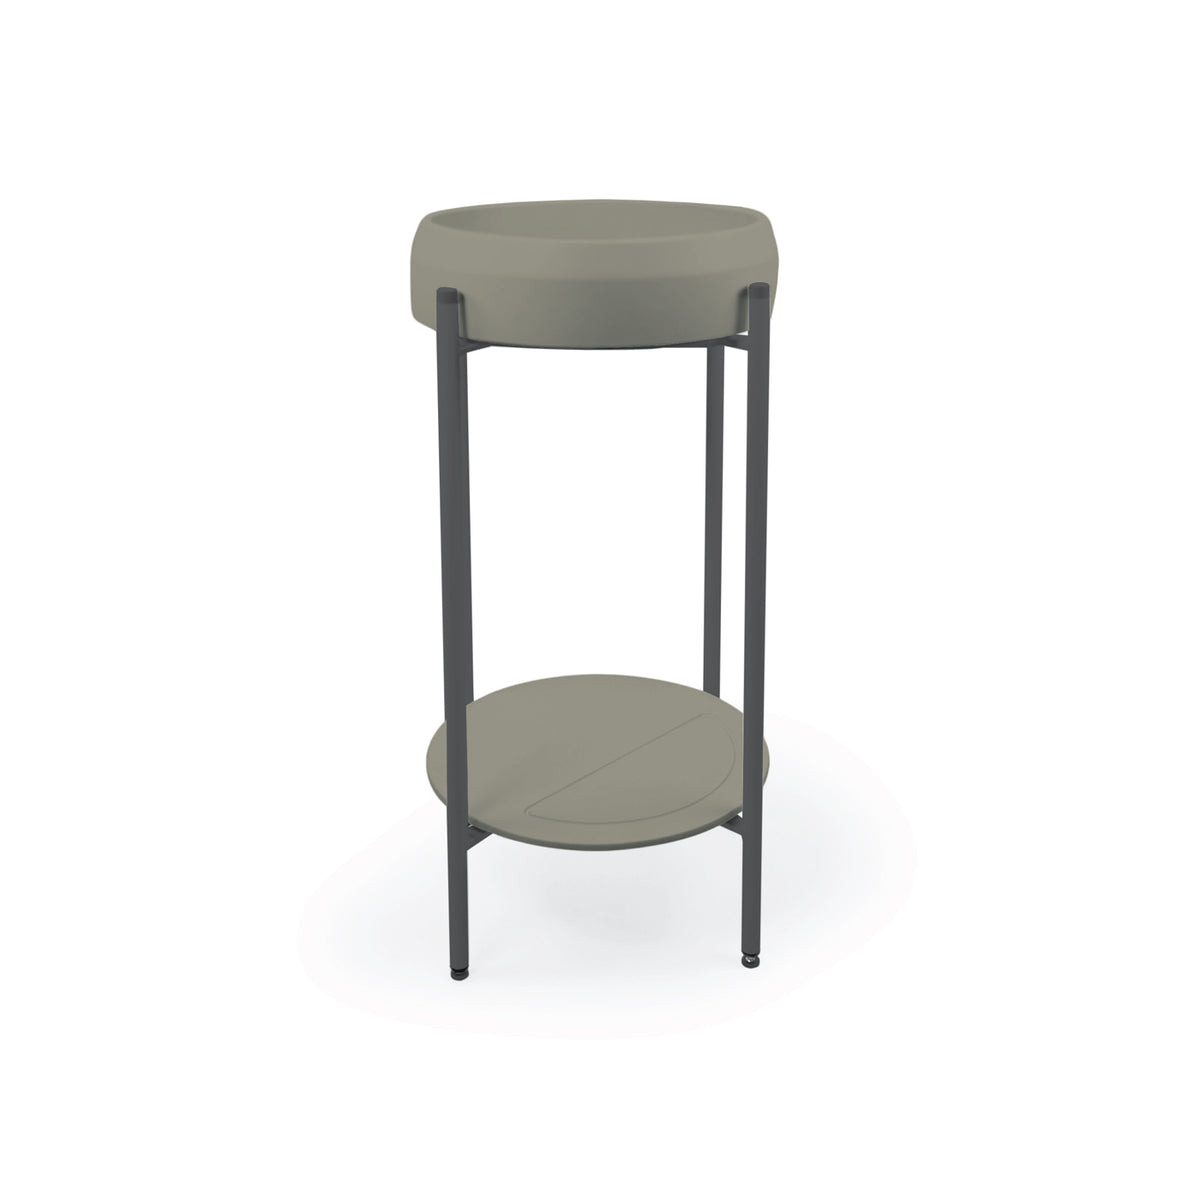 Prism Circle Basin - Stand (Olive)